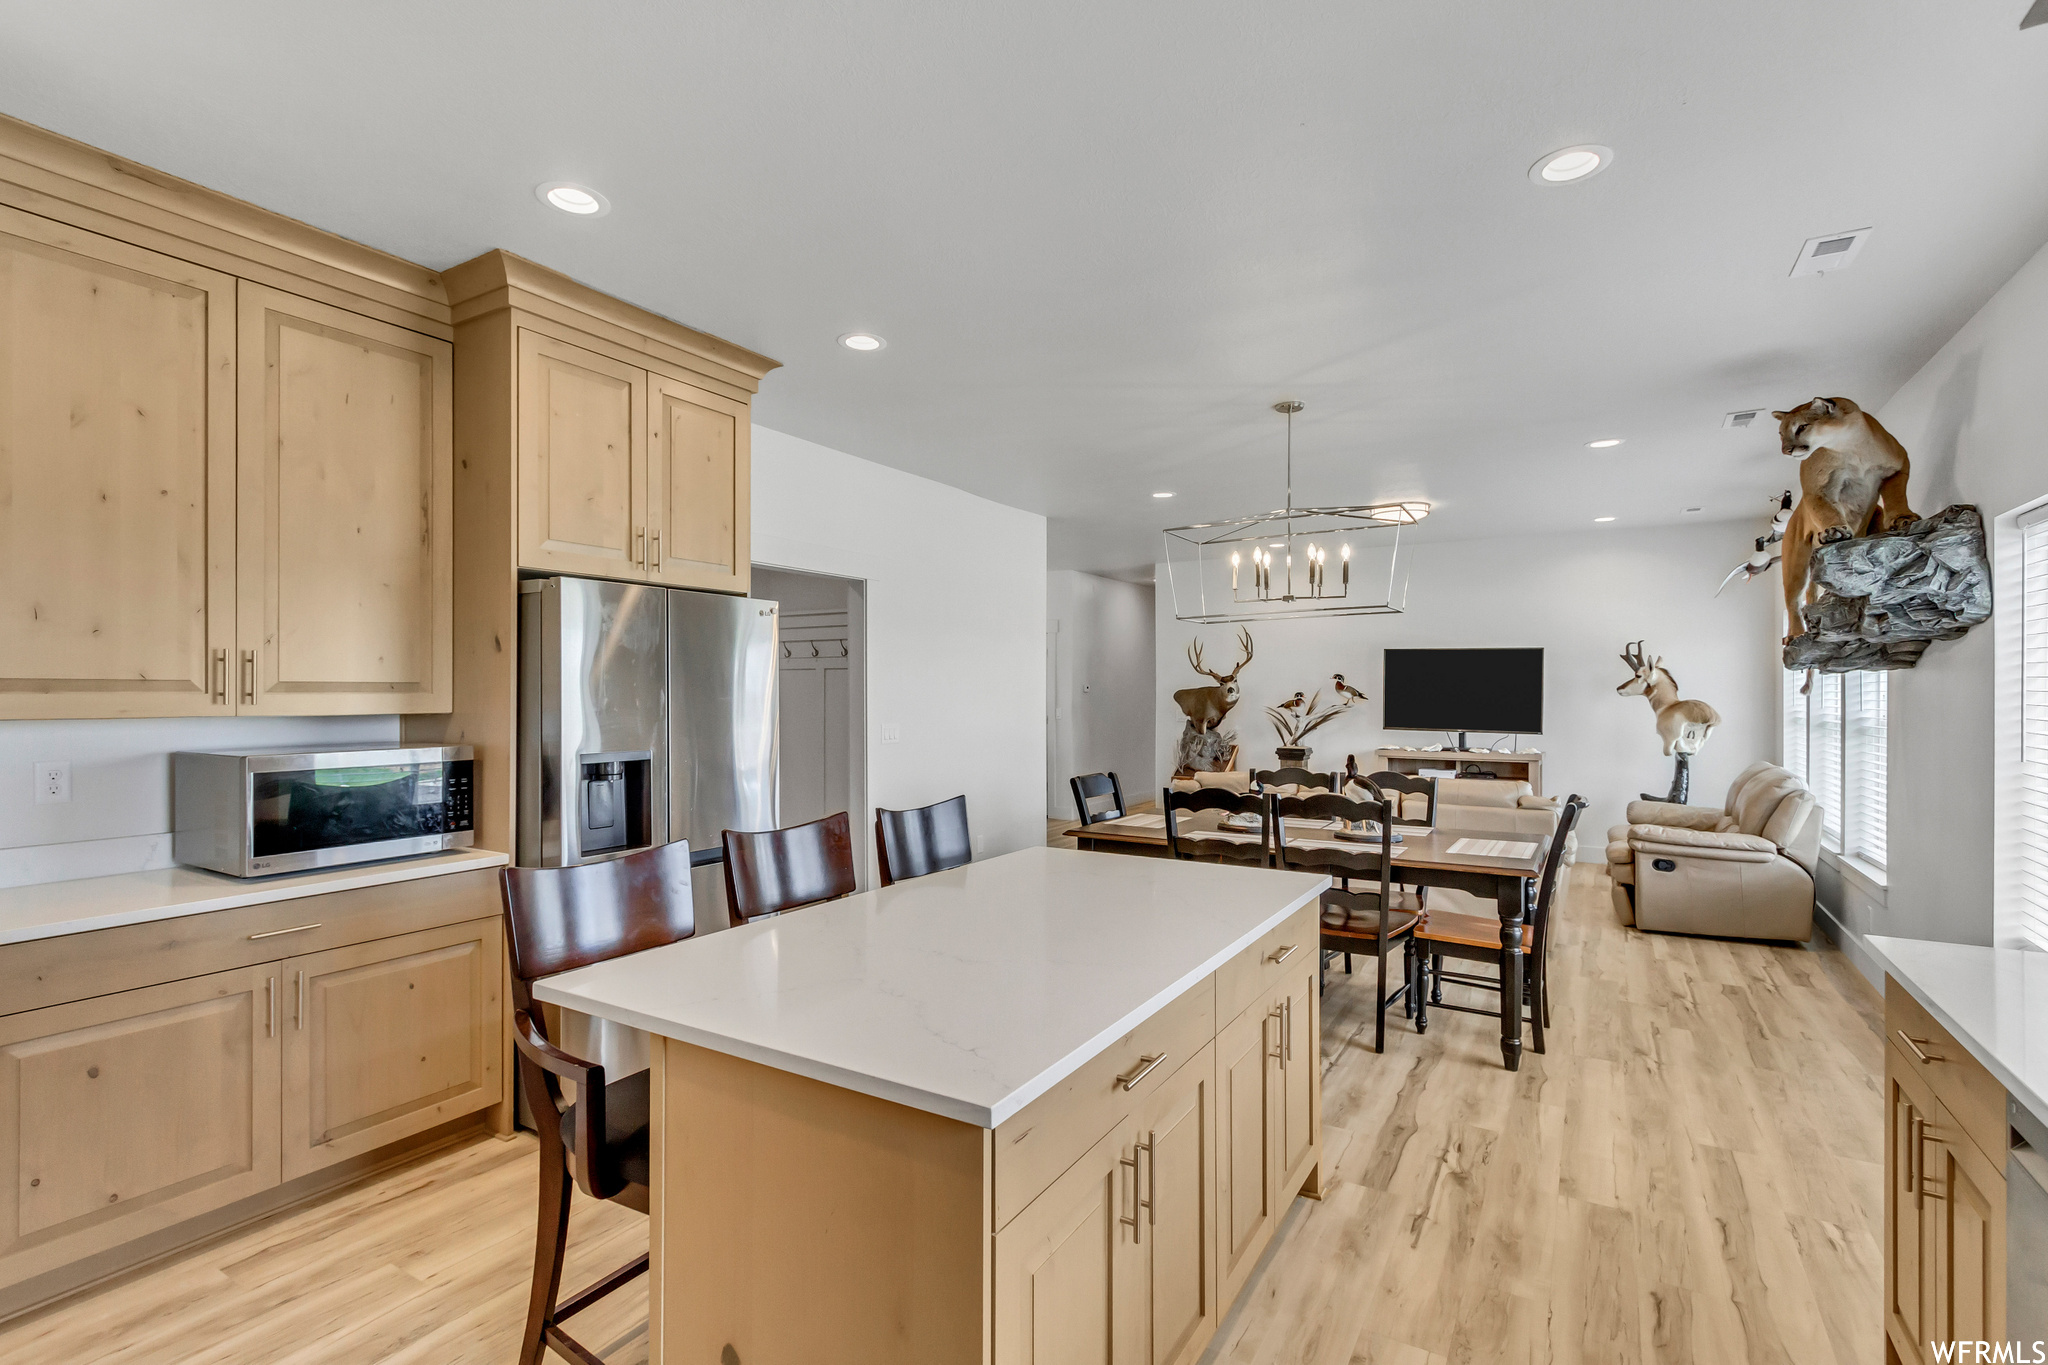 Kitchen featuring a breakfast bar area, a chandelier, appliances with stainless steel finishes, light hardwood / wood-style floors, and a kitchen island